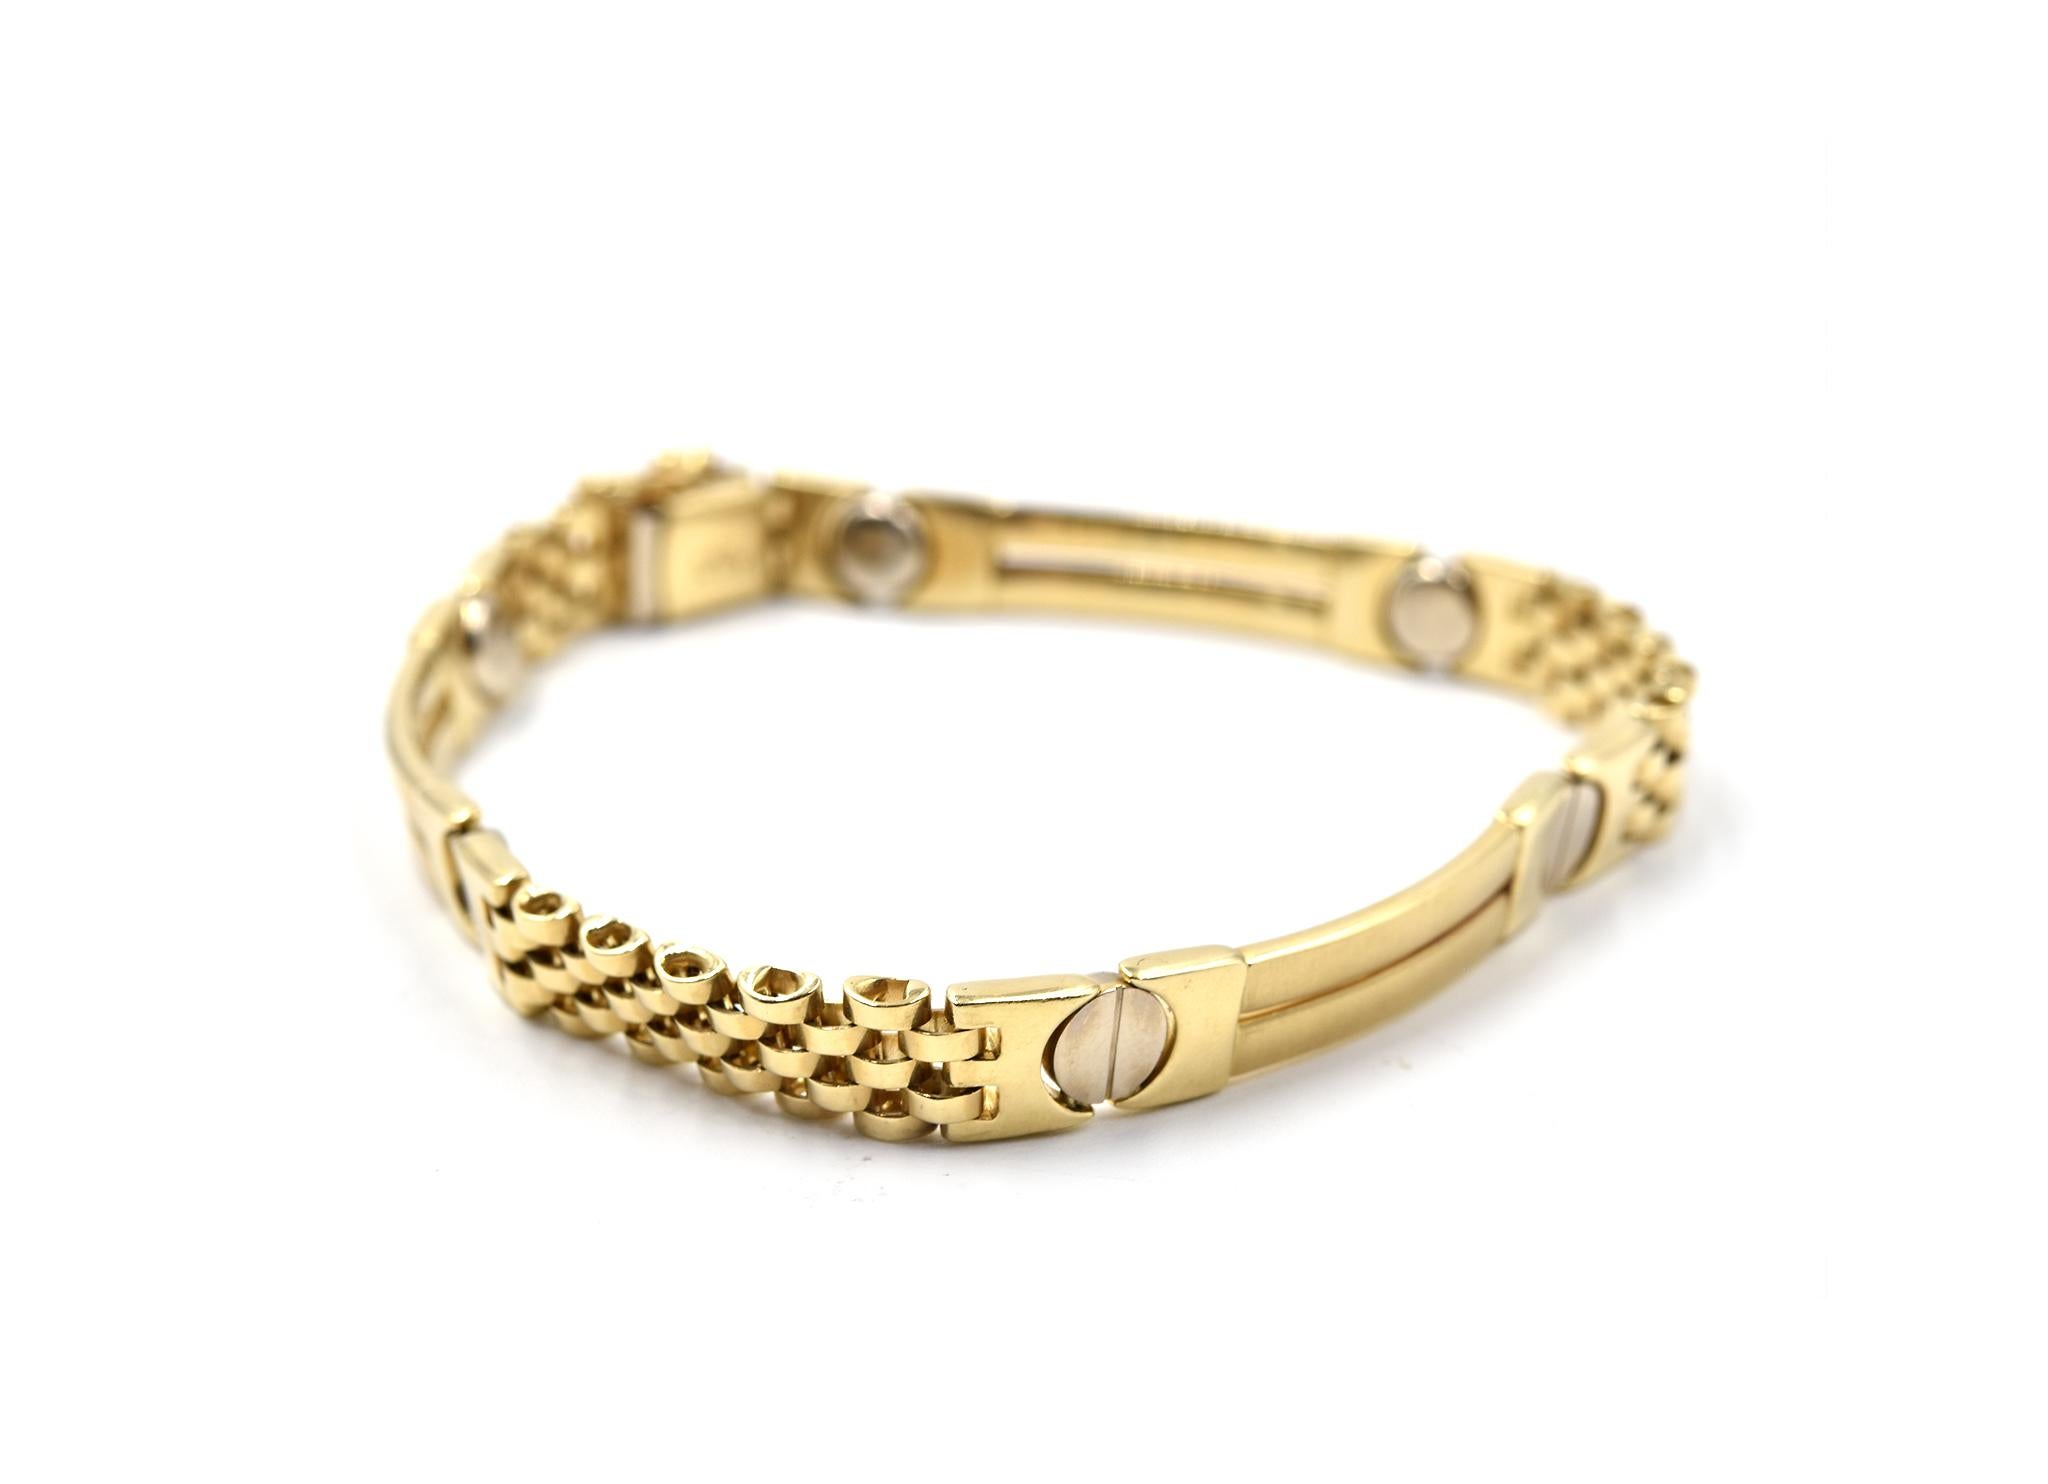 Designer: custom design
Material: 14k yellow gold
Dimensions: bracelet is 8-inch long and 1/4-inch wide
Weight: 19.7 grams
